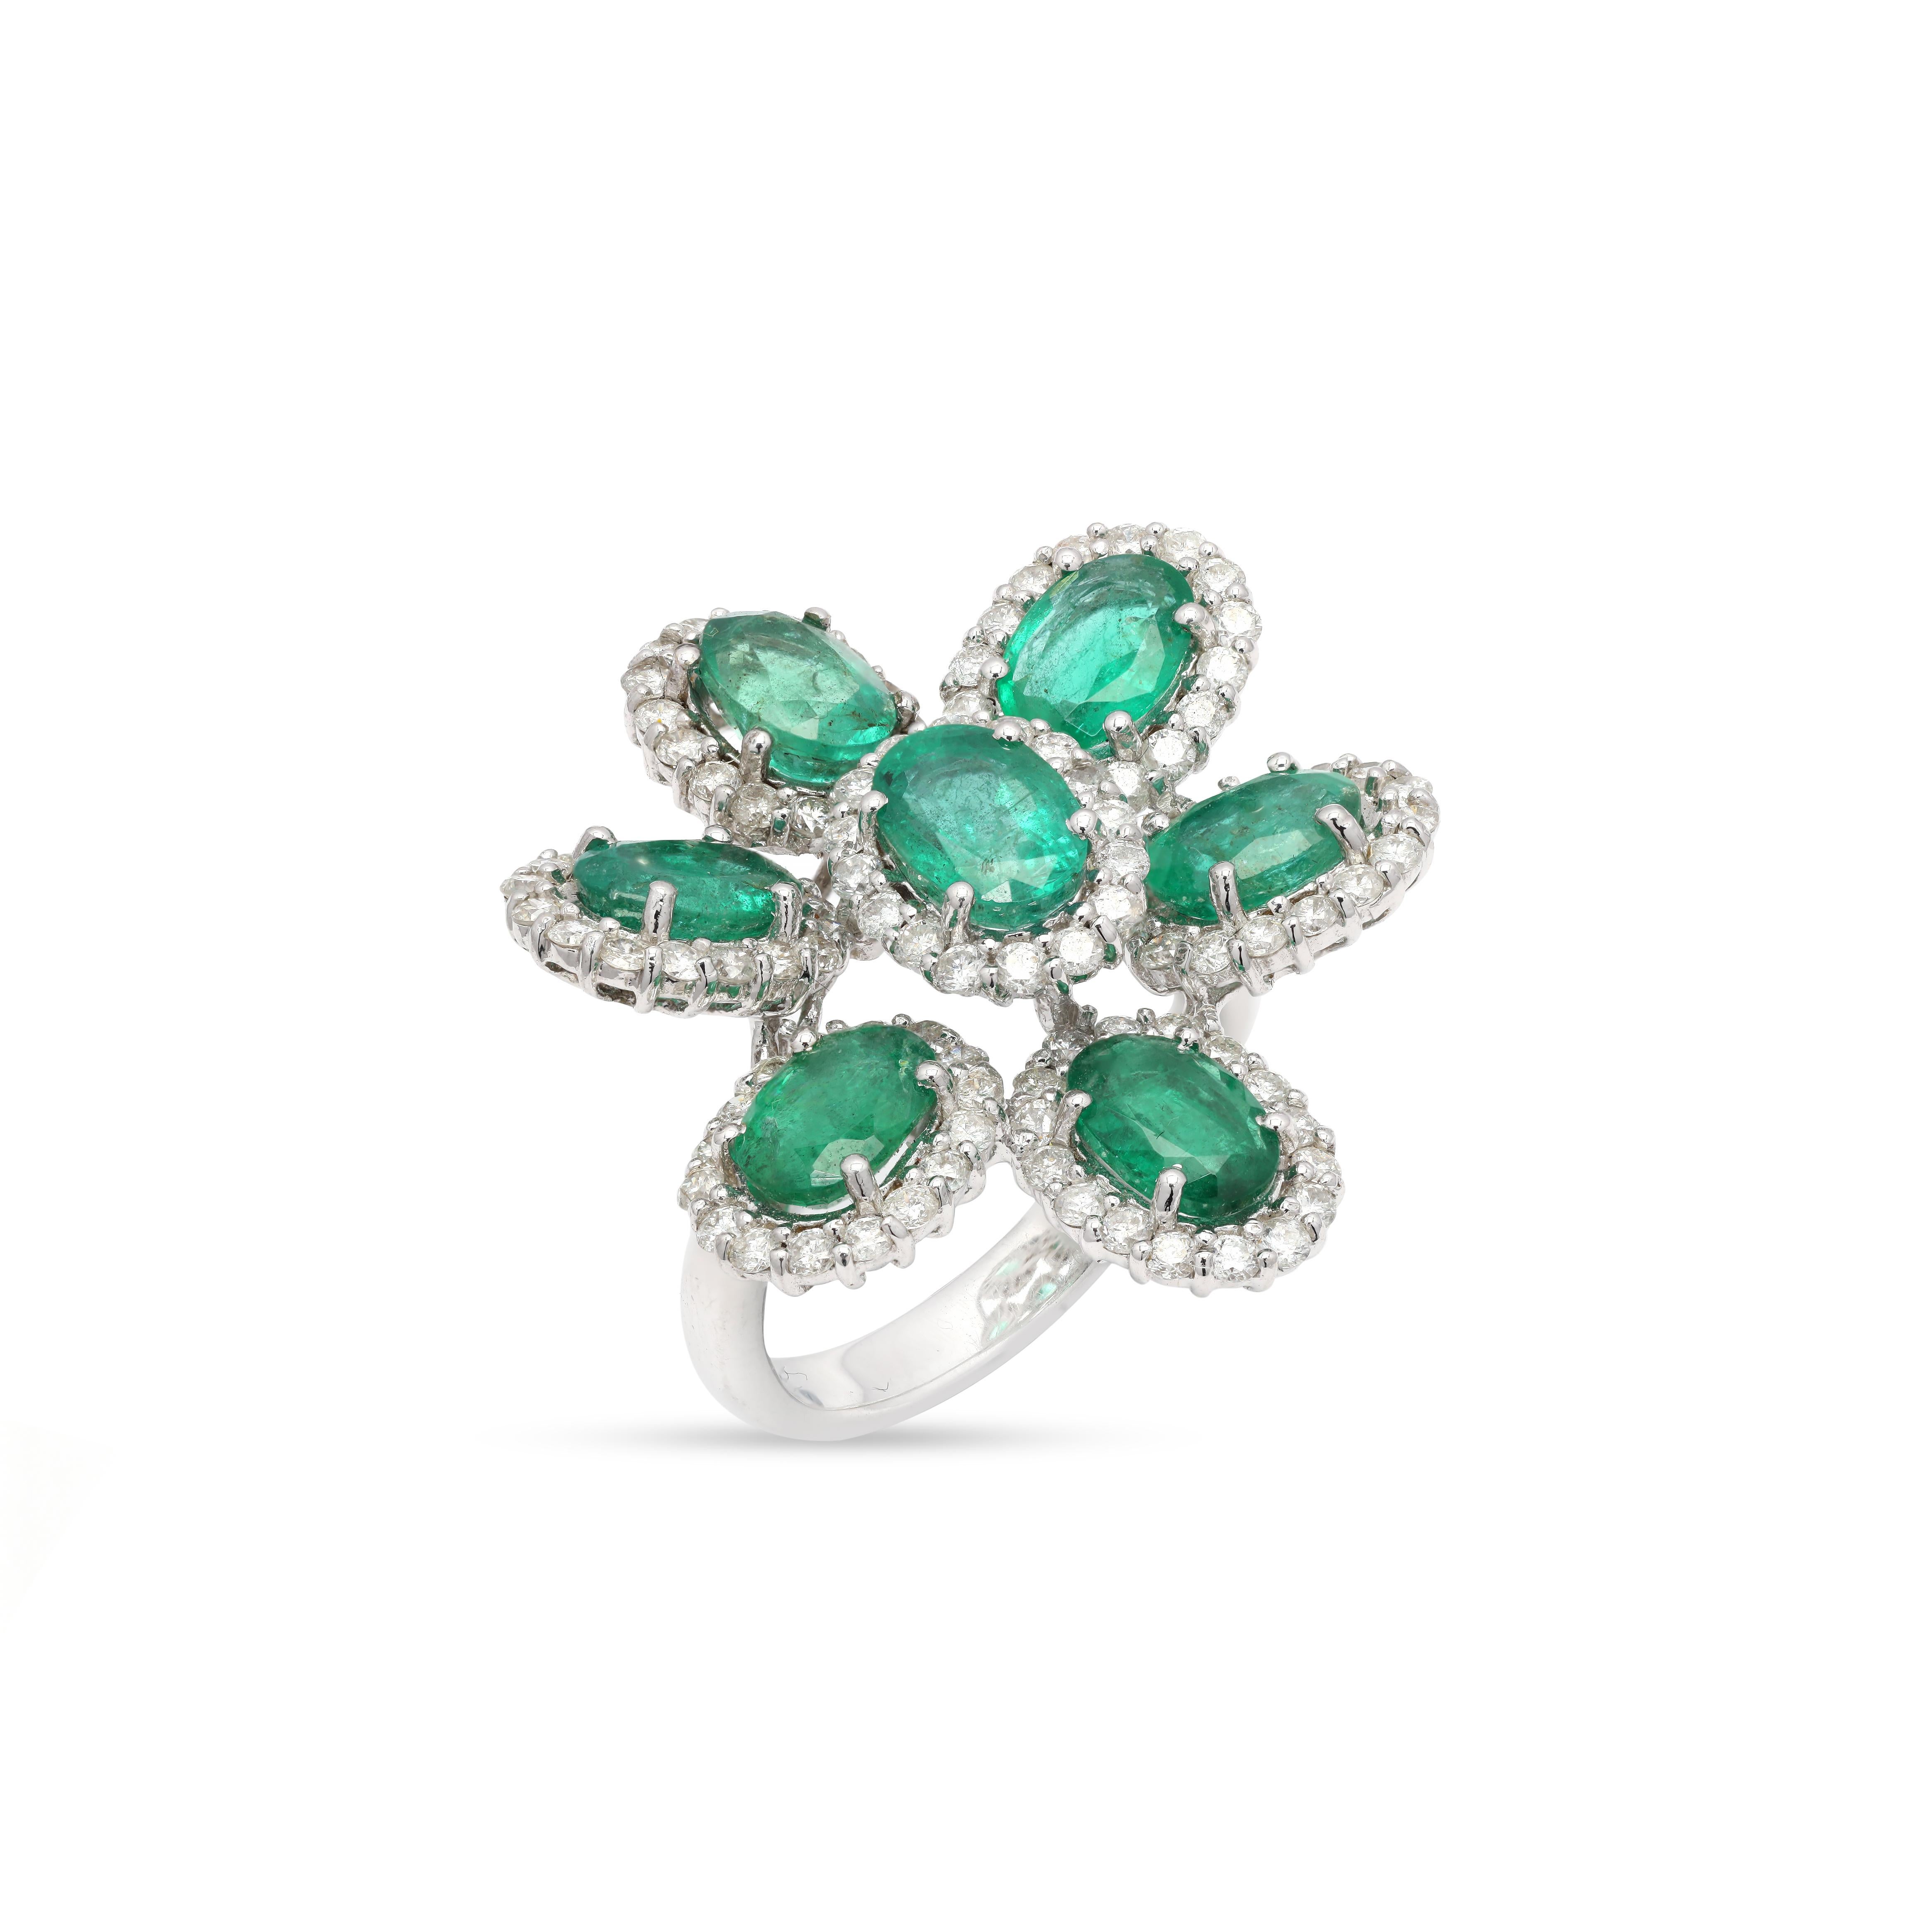 For Sale:  Statement 5 ct Emerald Flower Ring with Halo Diamonds in 14 Karat White Gold 5